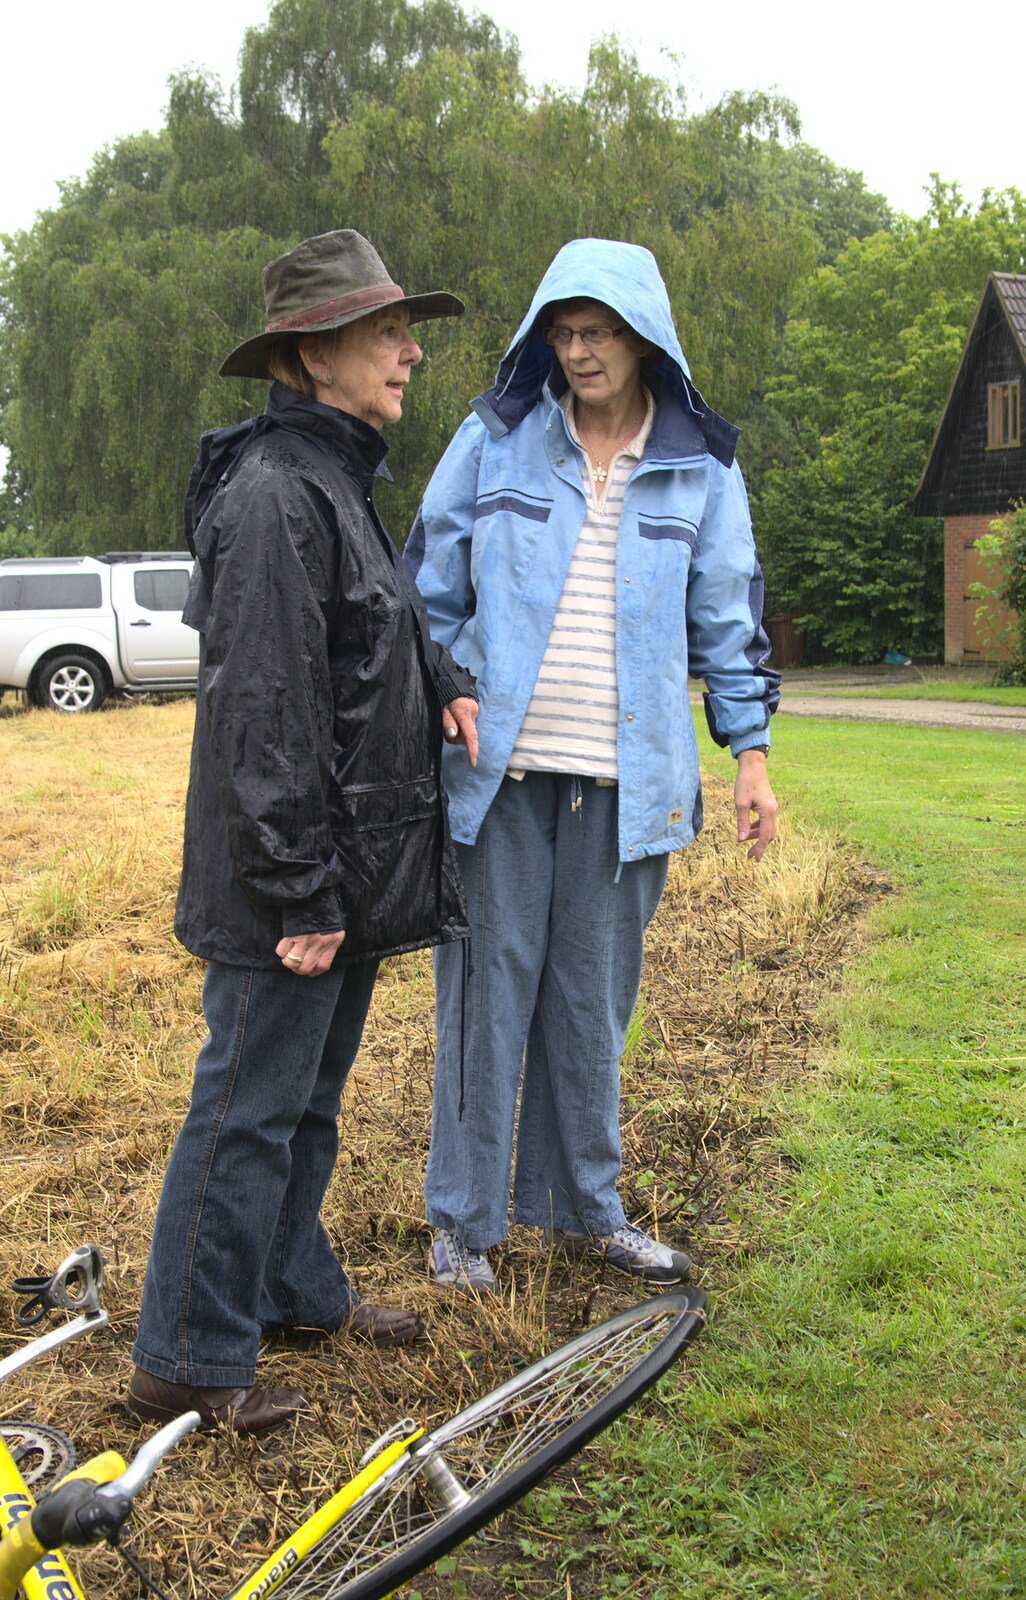 Janice chats to someone in the rain from Thrandeston Pig, Little Green, Thrandeston, Suffolk - 29th June 2014